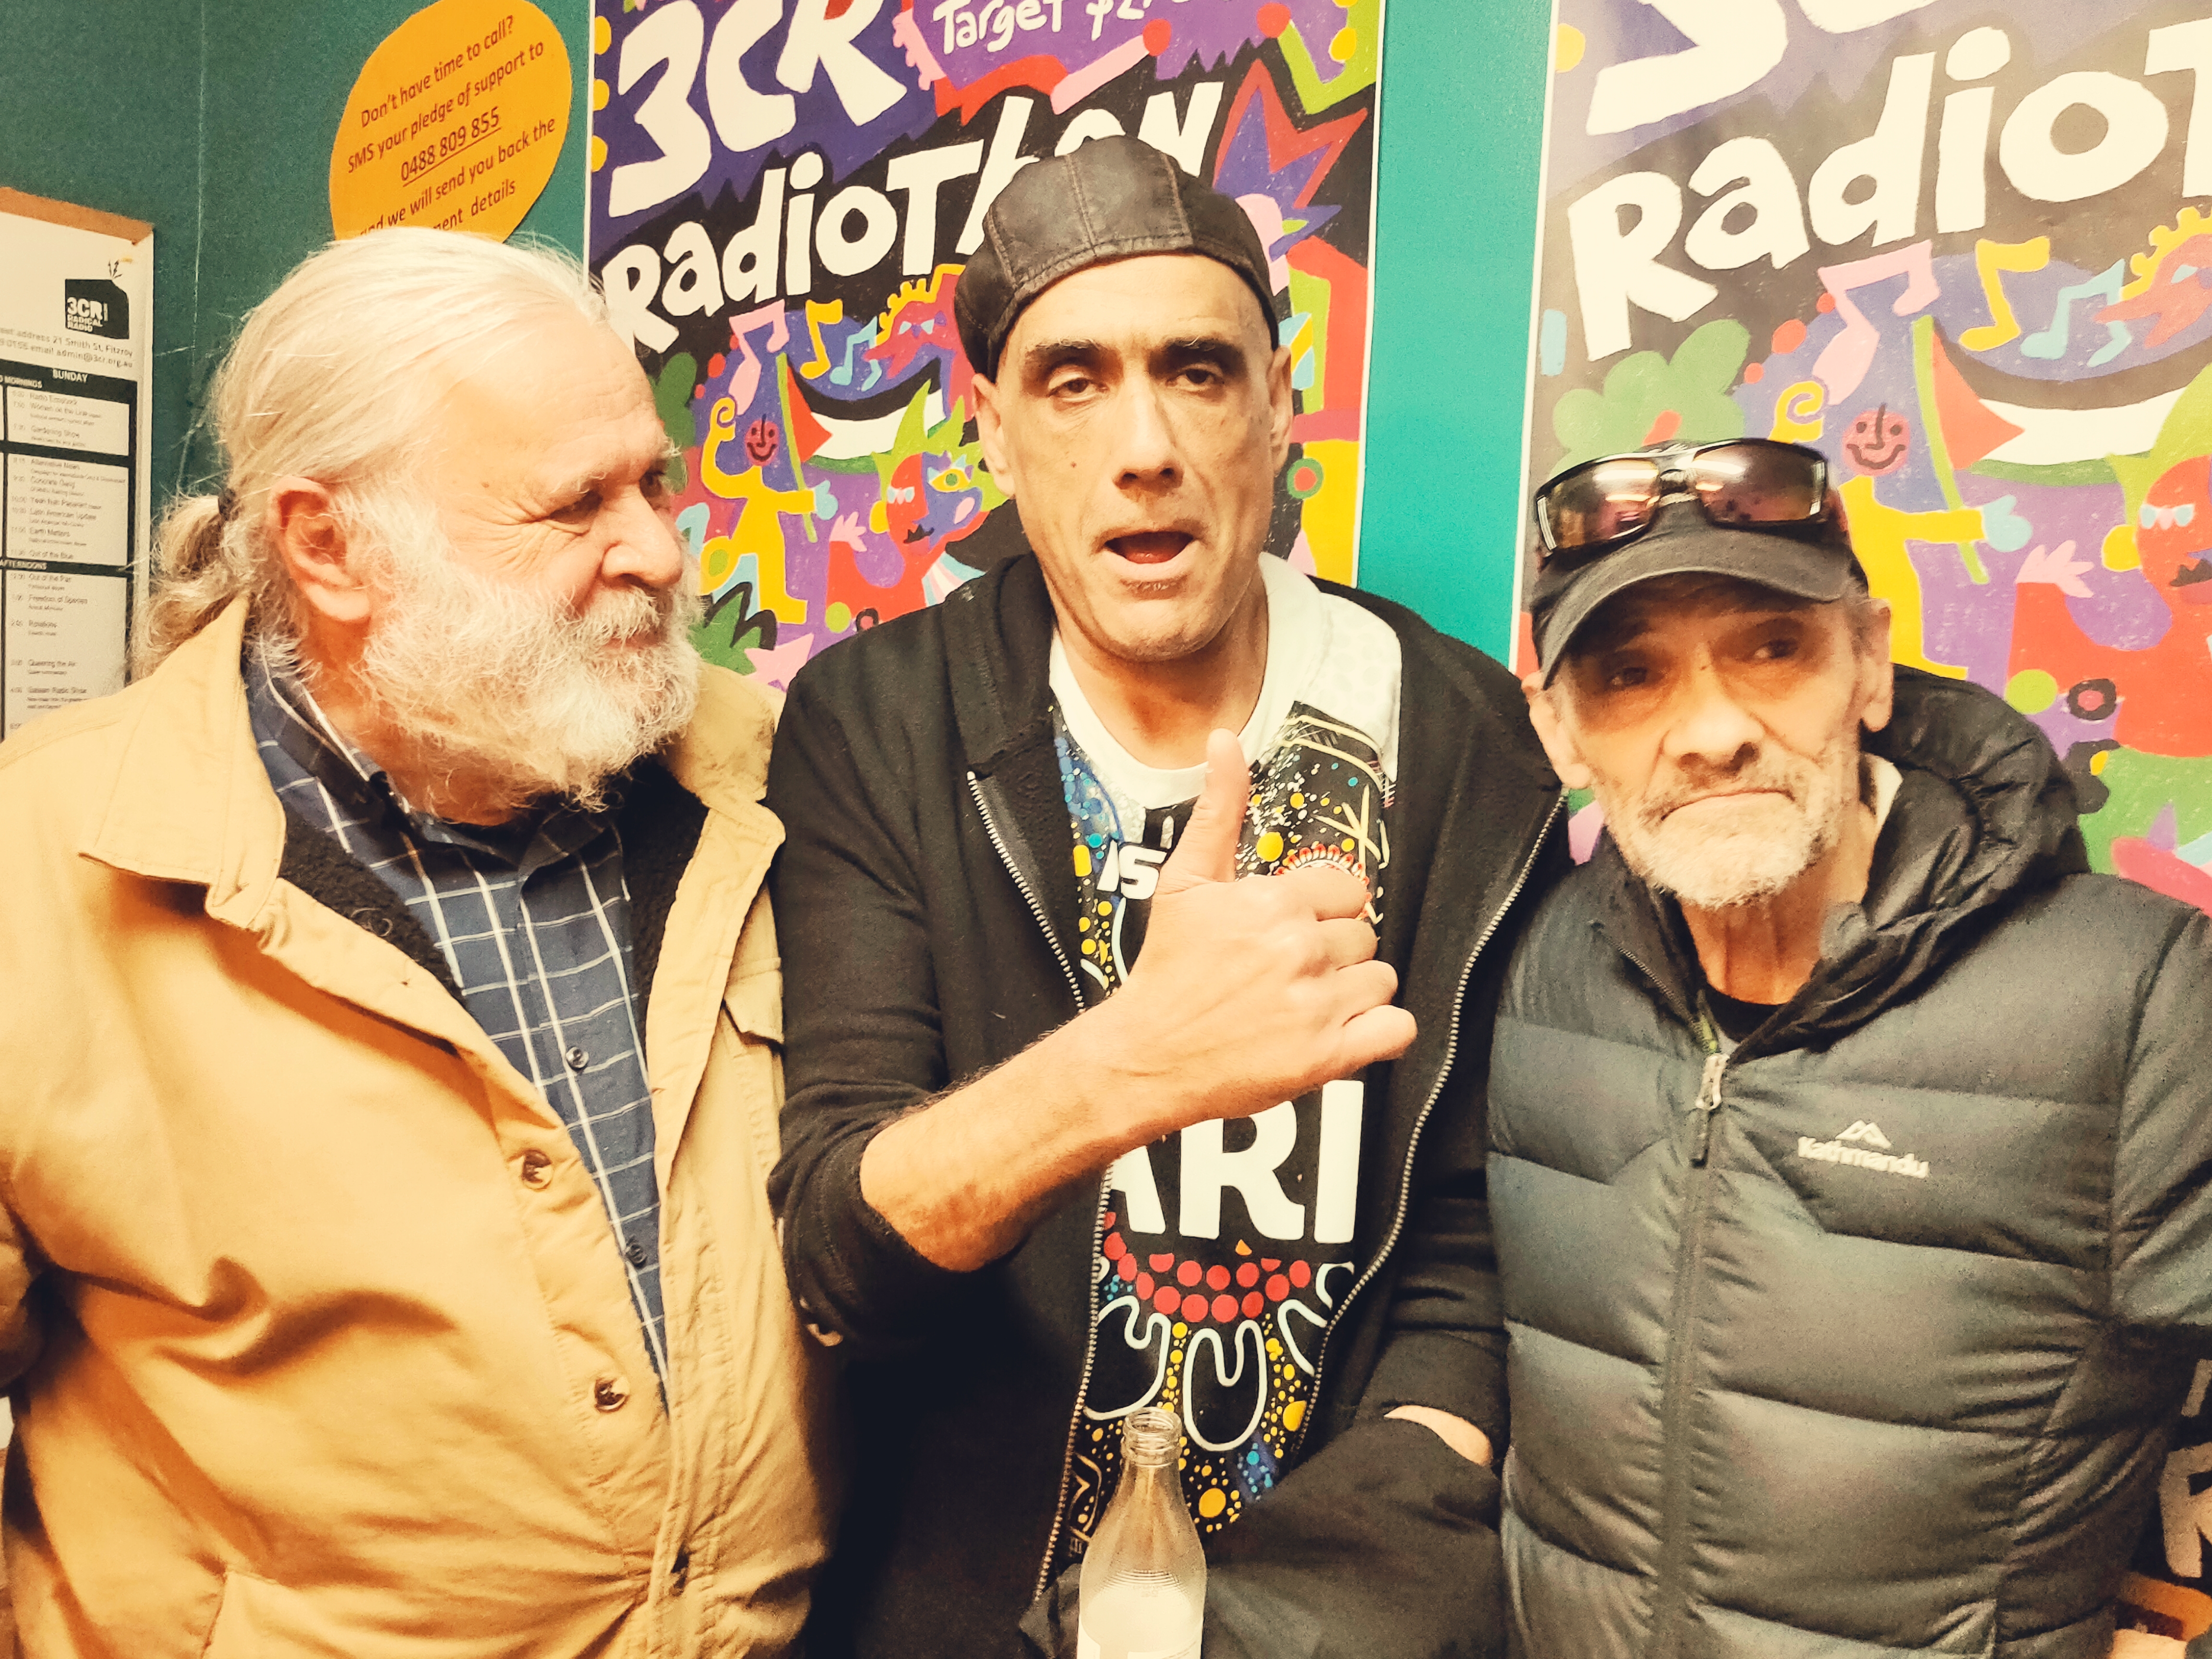 Robbie Thorpe stands next to fellow 3CR broadcaster, Gavin Moore, and host of Radical Australia, Joe Toscano. Robbie and and Gavin look straight ahead. Gavin gives a thumbs-up gesture. Joe looks sideways at Robbie and Gavin